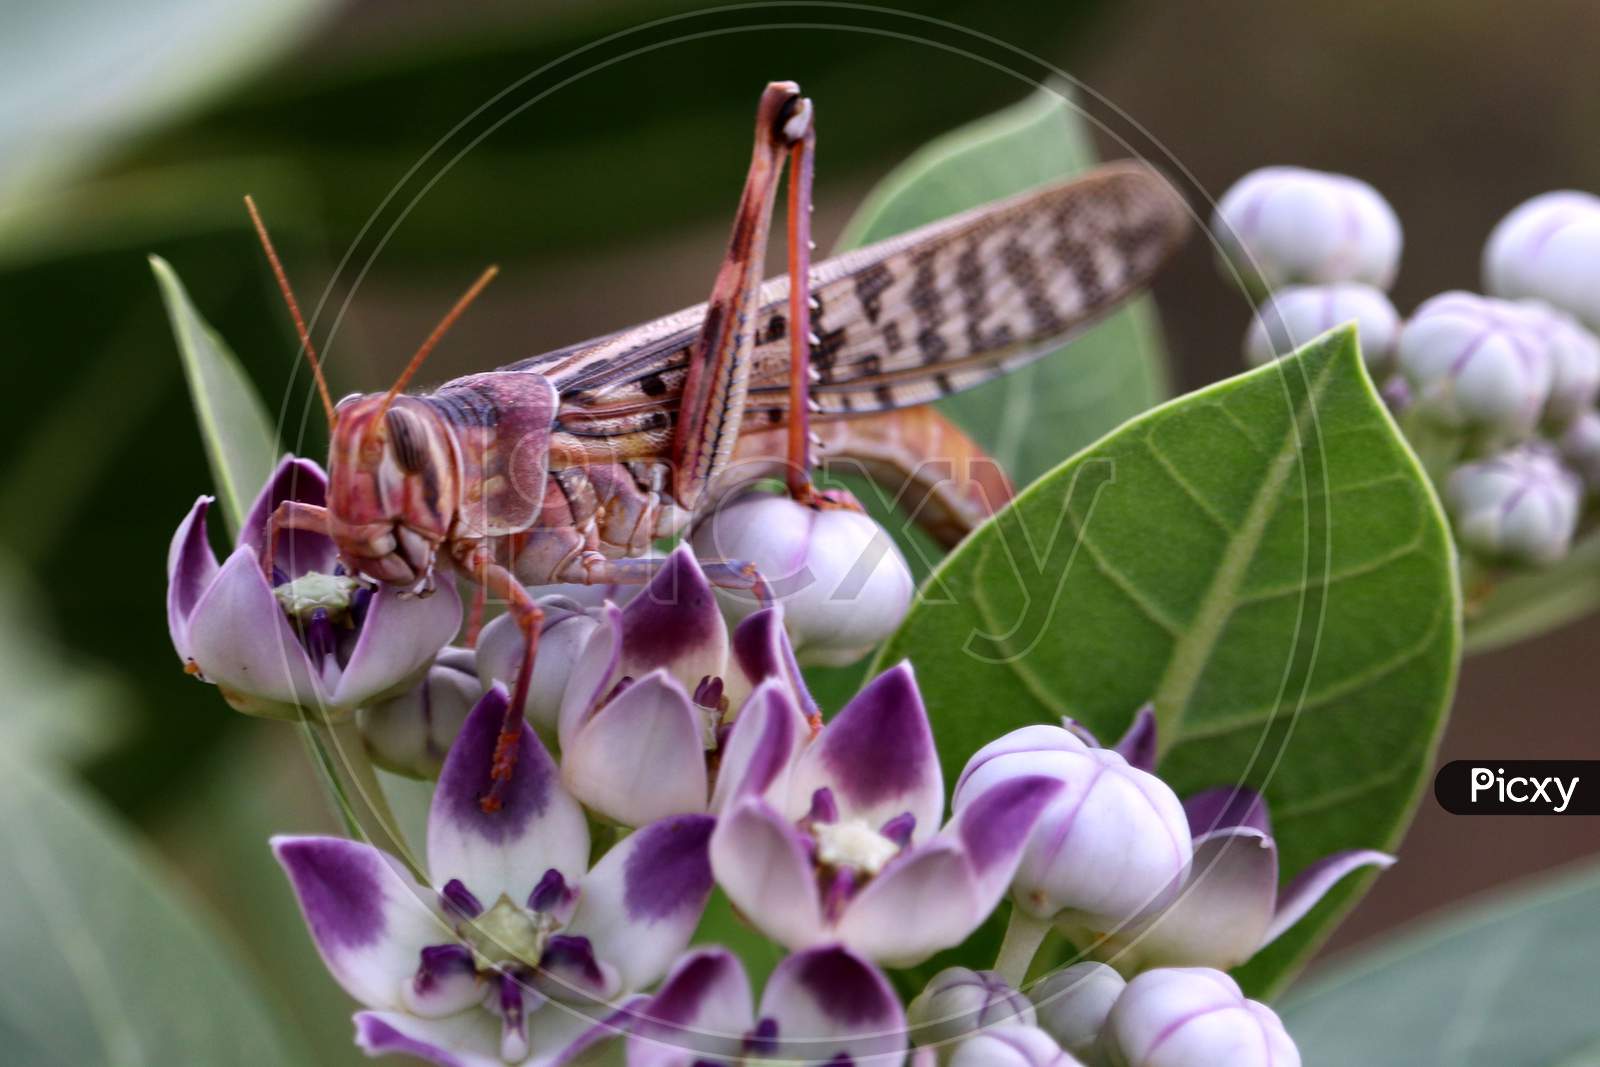 A Locust Spotted In The Outskirts Of Ajmer, Rajasthan On 15 June 2020.